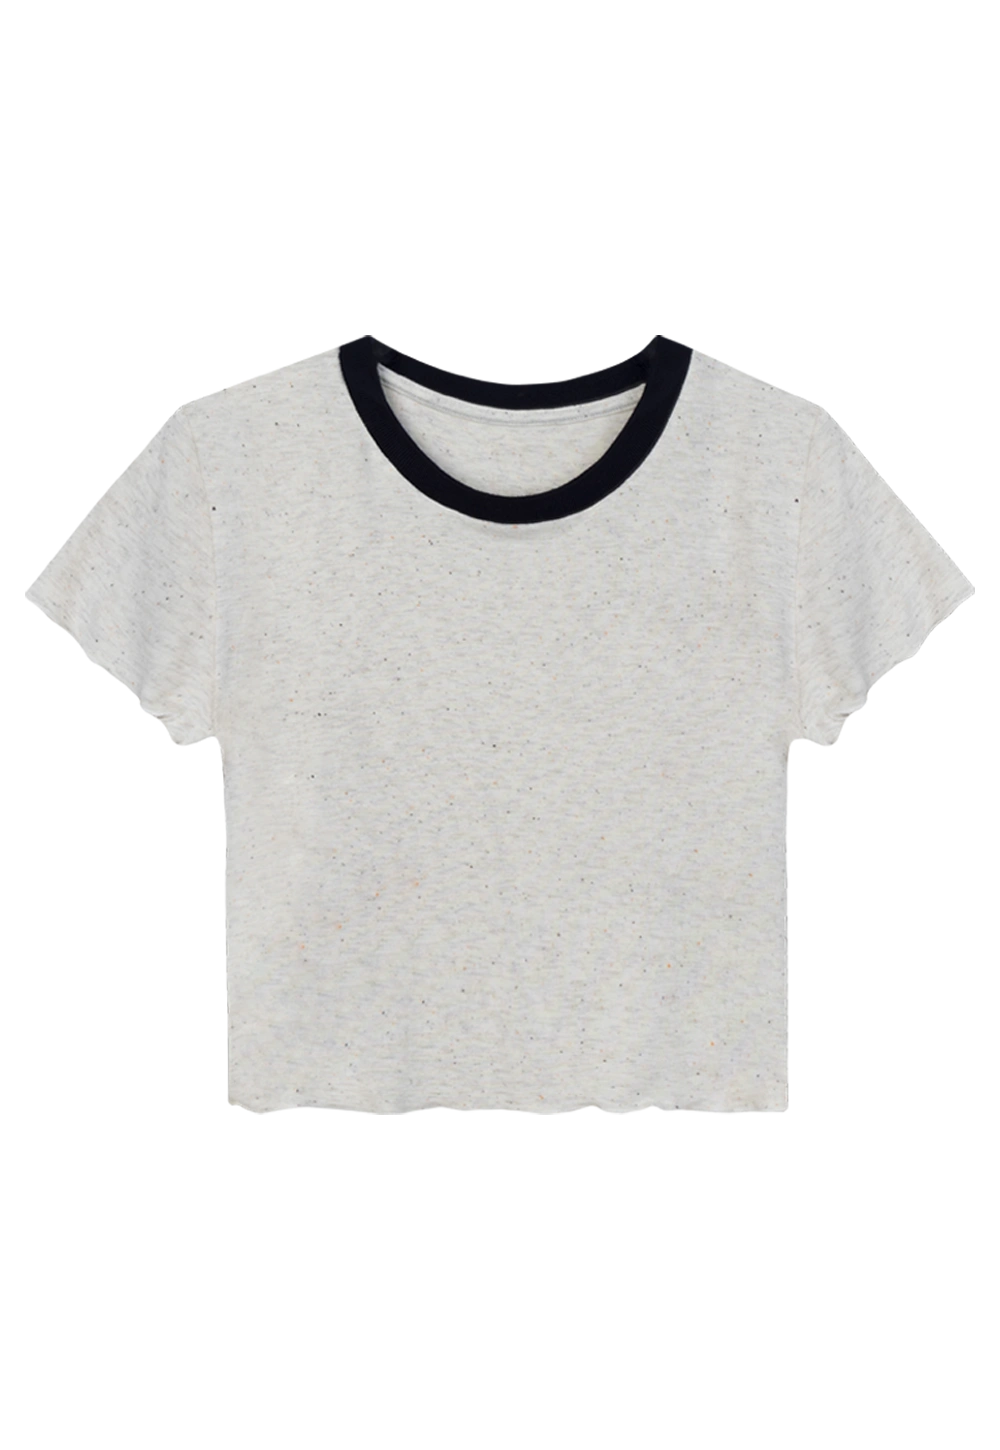 Women's Contrast Crew Neck T-Shirt - Casual Chic Style